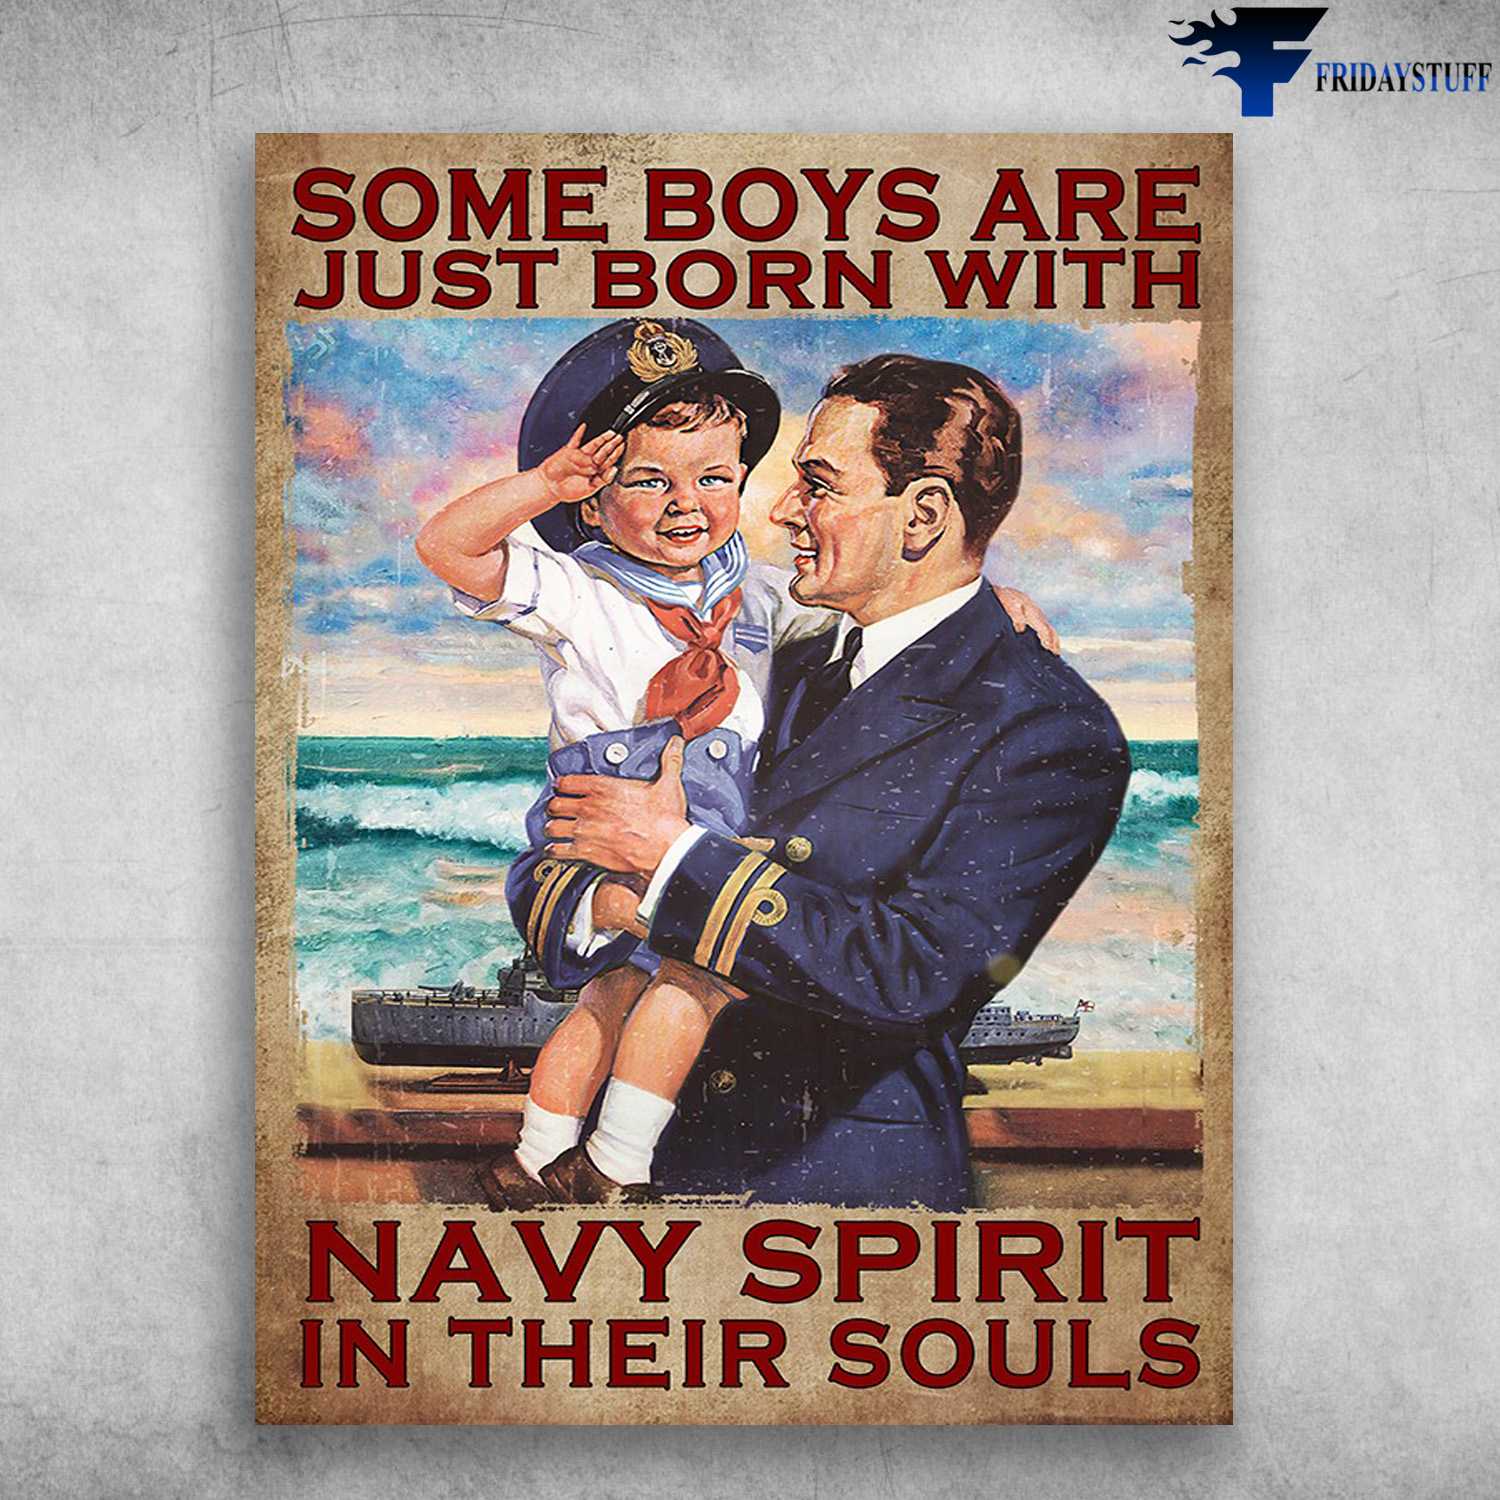 Sailor Poster, Father And Son - Some Boys Are Just Born With, Navy Spirit In Their Souls